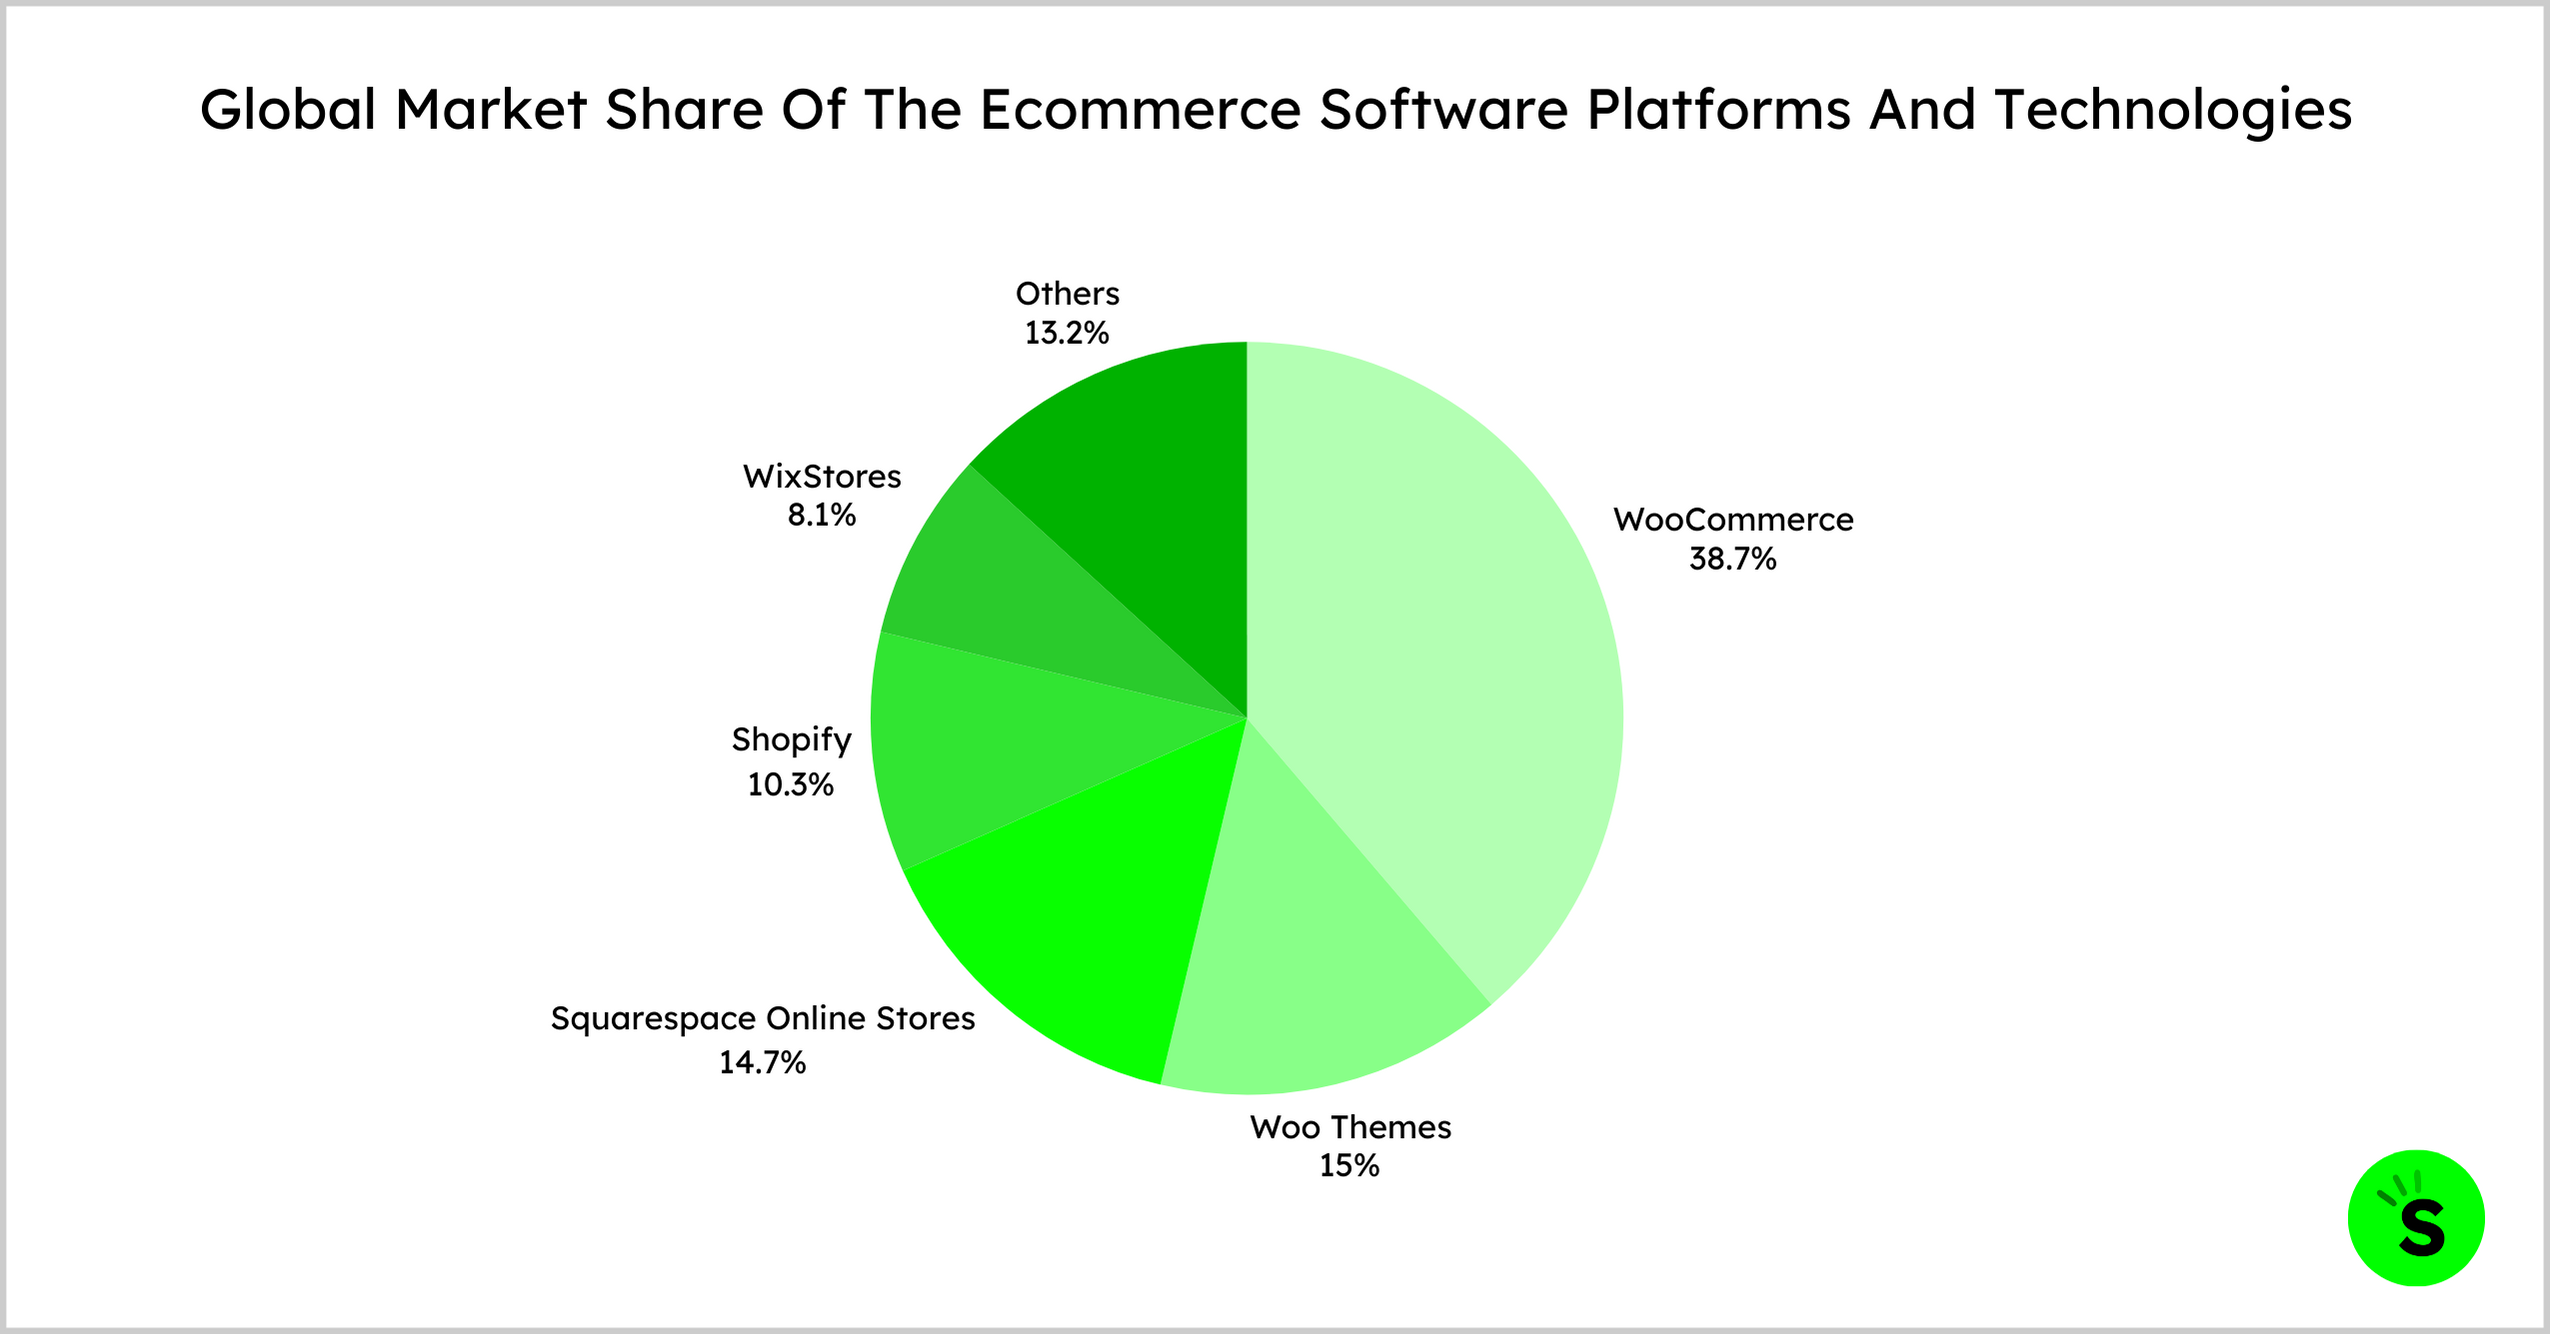 The Ecommerce Software Platforms And Technologies